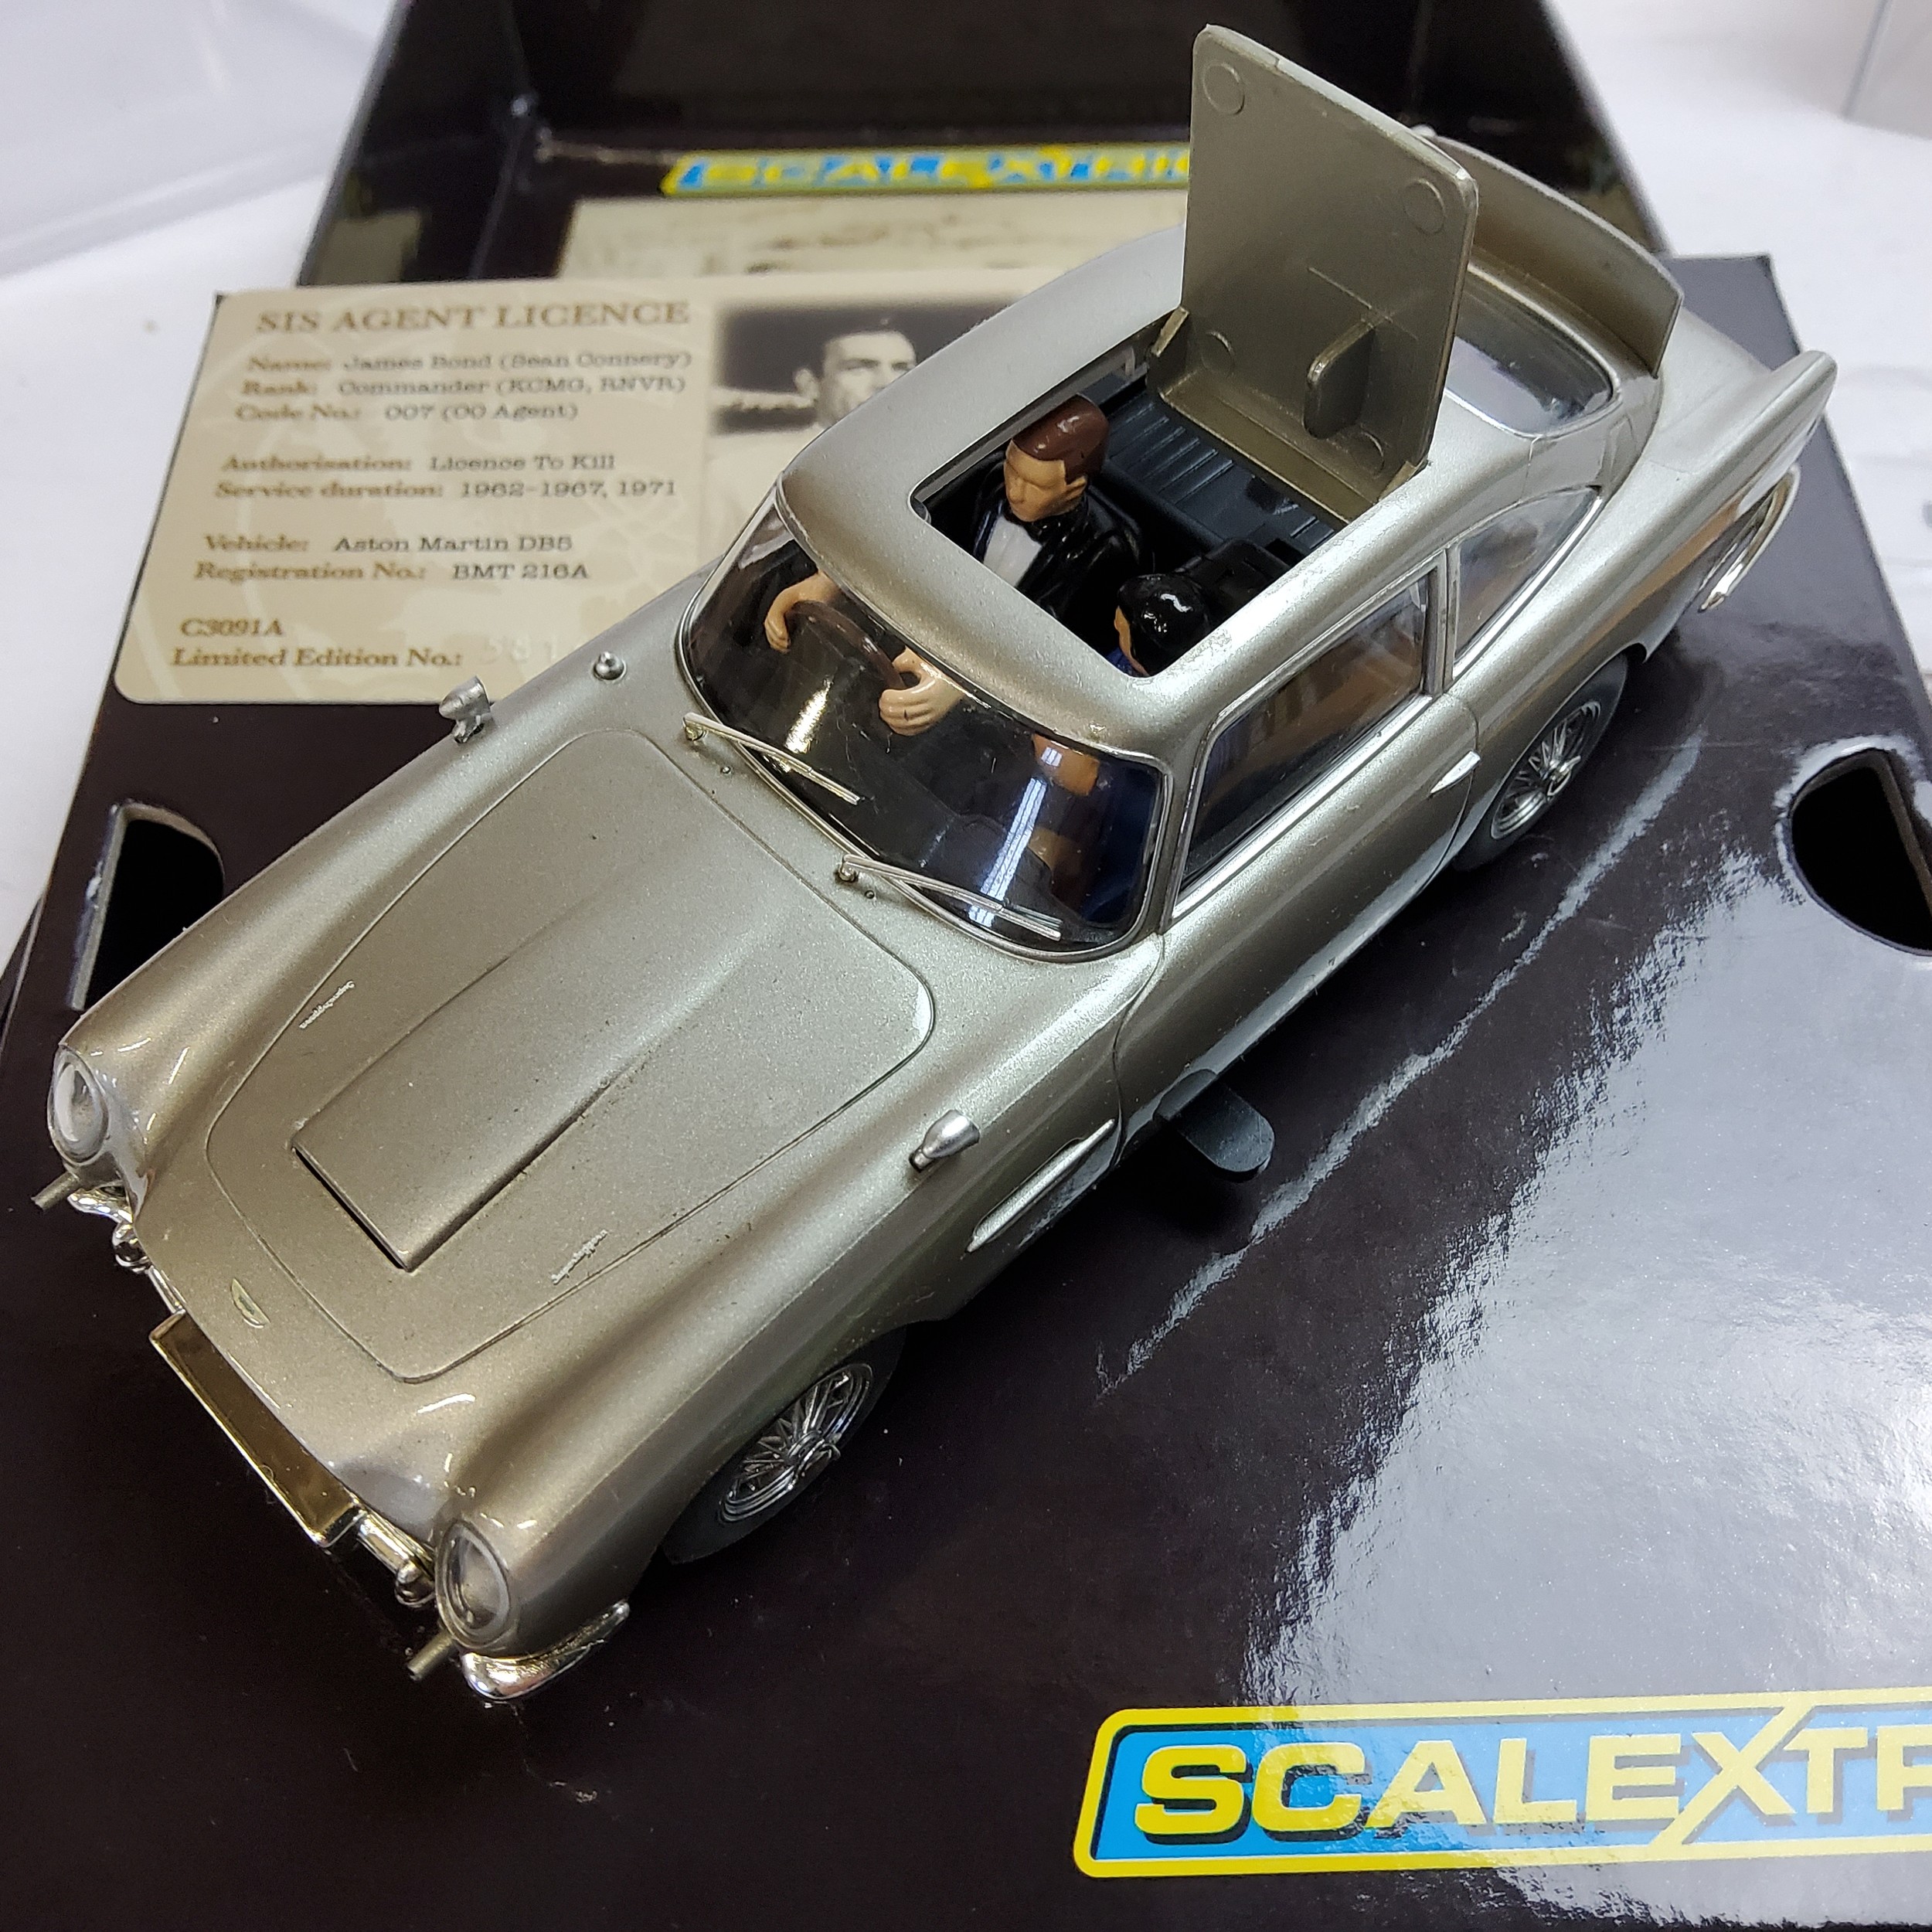 Scalextric C3091A - "James Bond" Slot Car Aston Martin DB5 taken from the film "Goldfinger" - (1st - Image 4 of 6